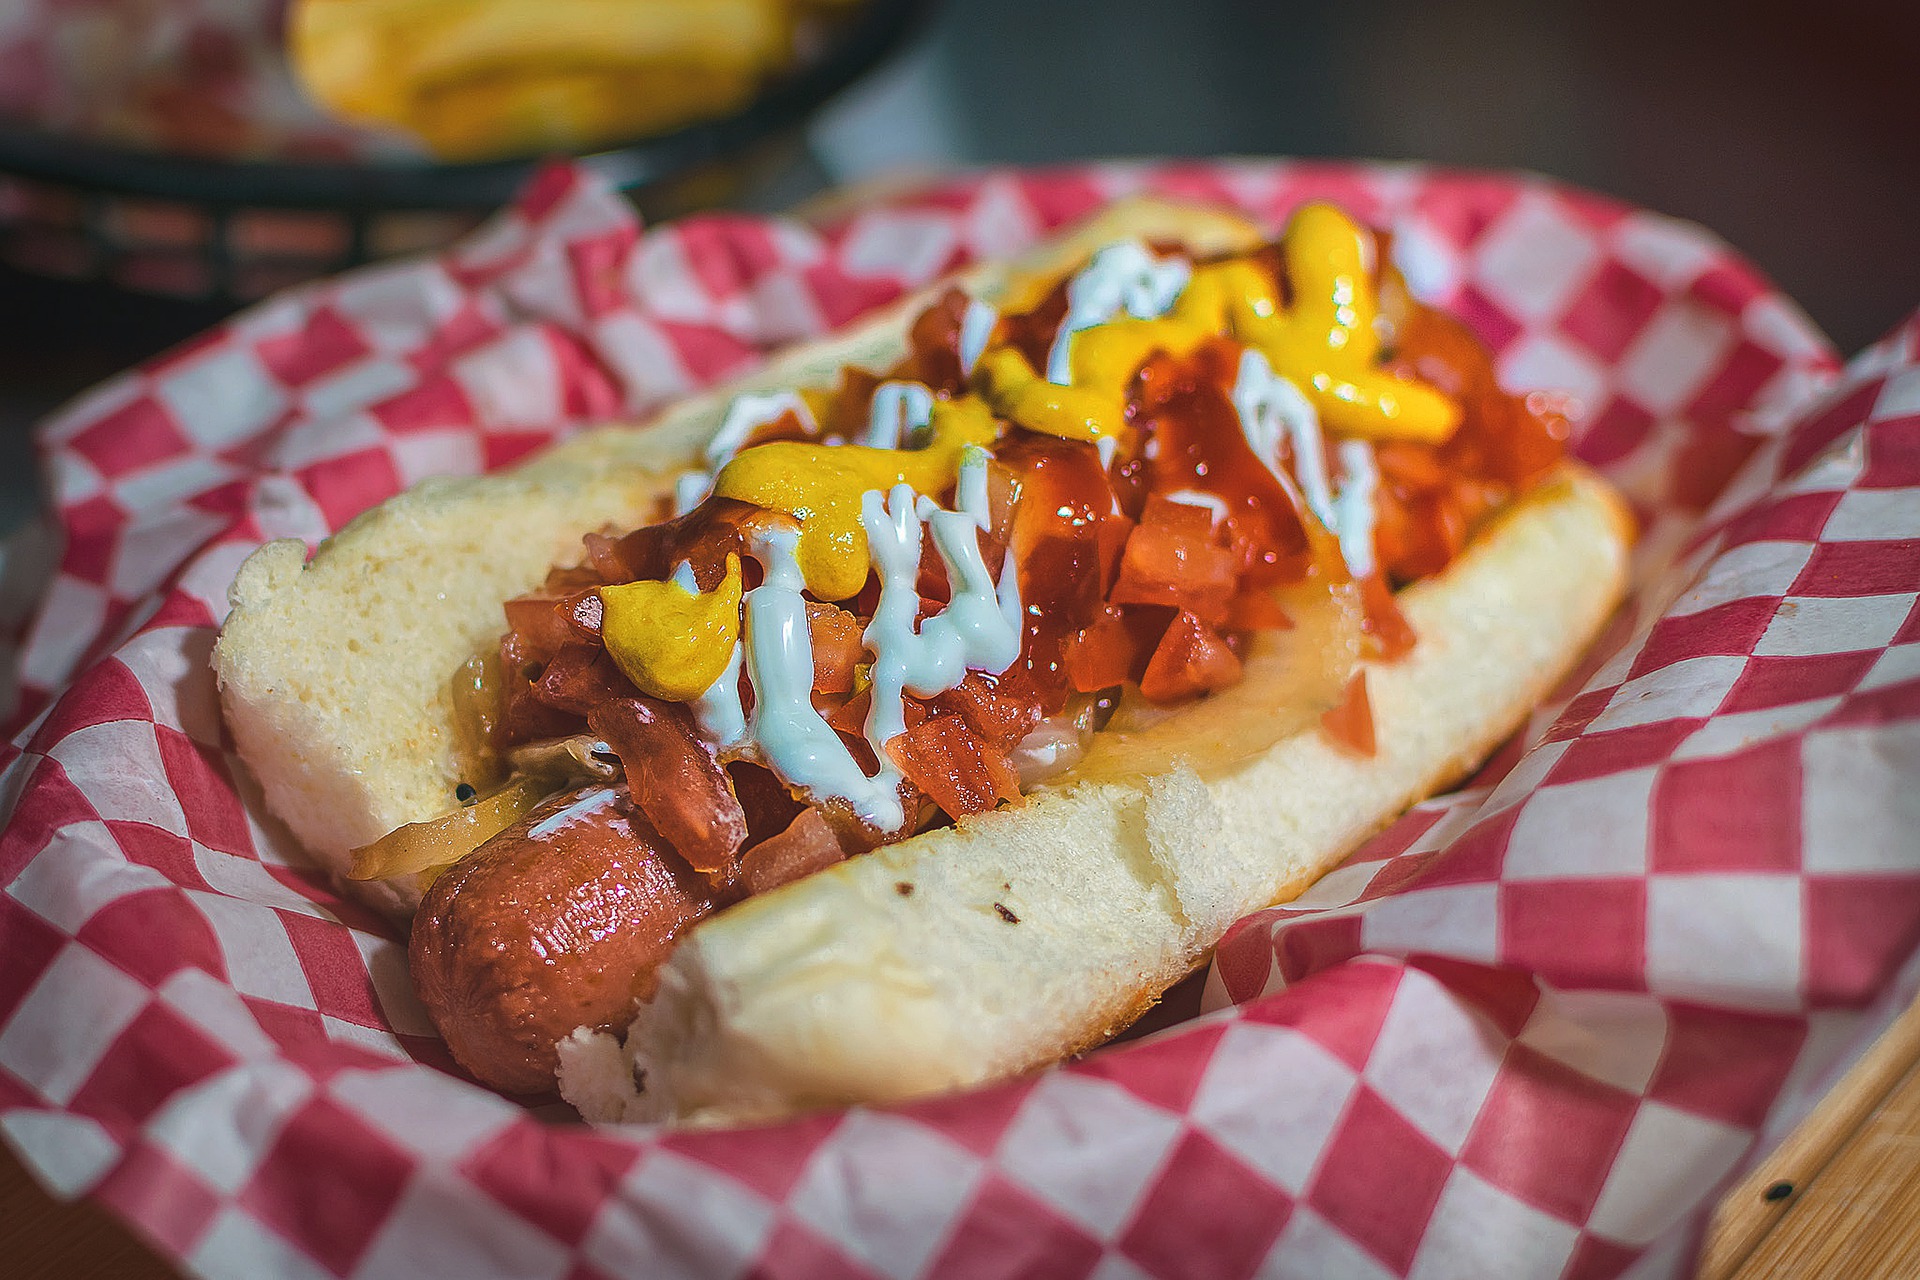 You are currently viewing Chili Dogs & Hackers: A Scareware Story.